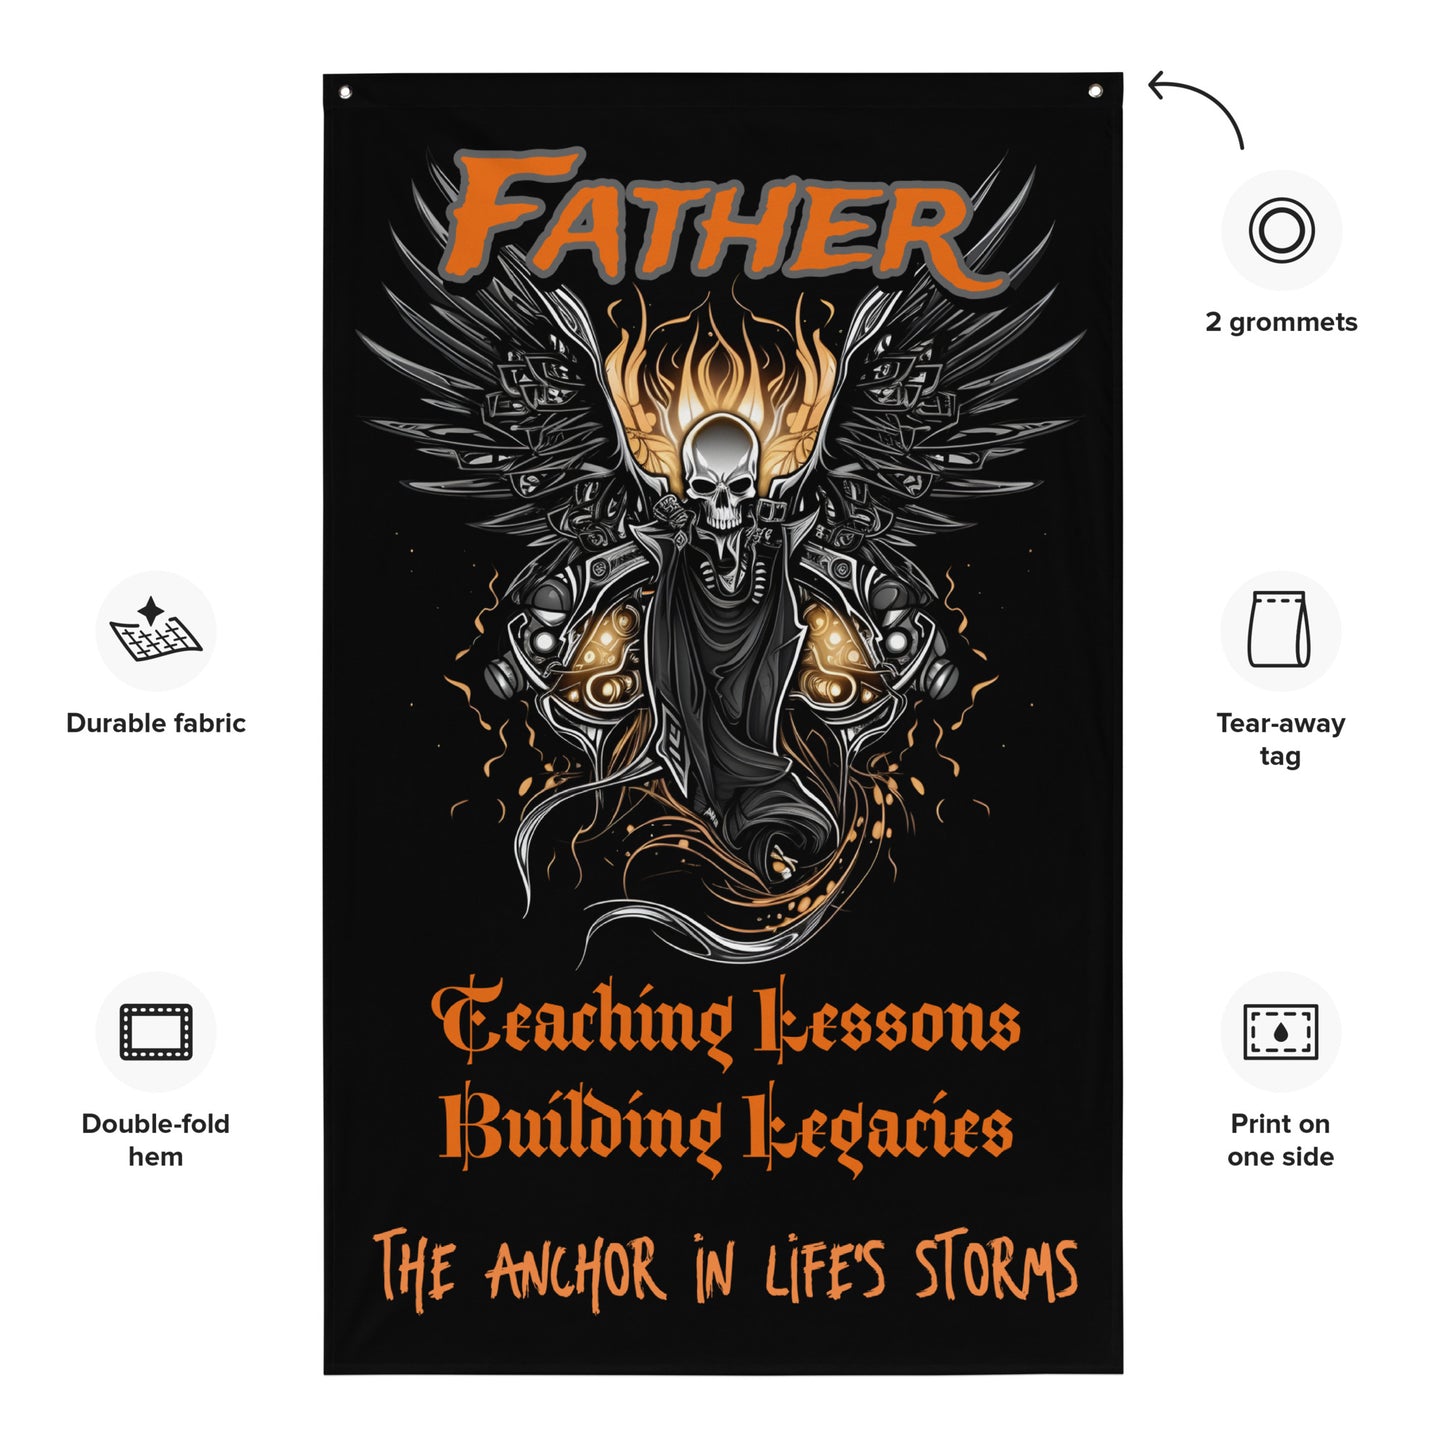 Fathers Day, Dad, Teaching Lessons, Building Legacies Biker Style Flag